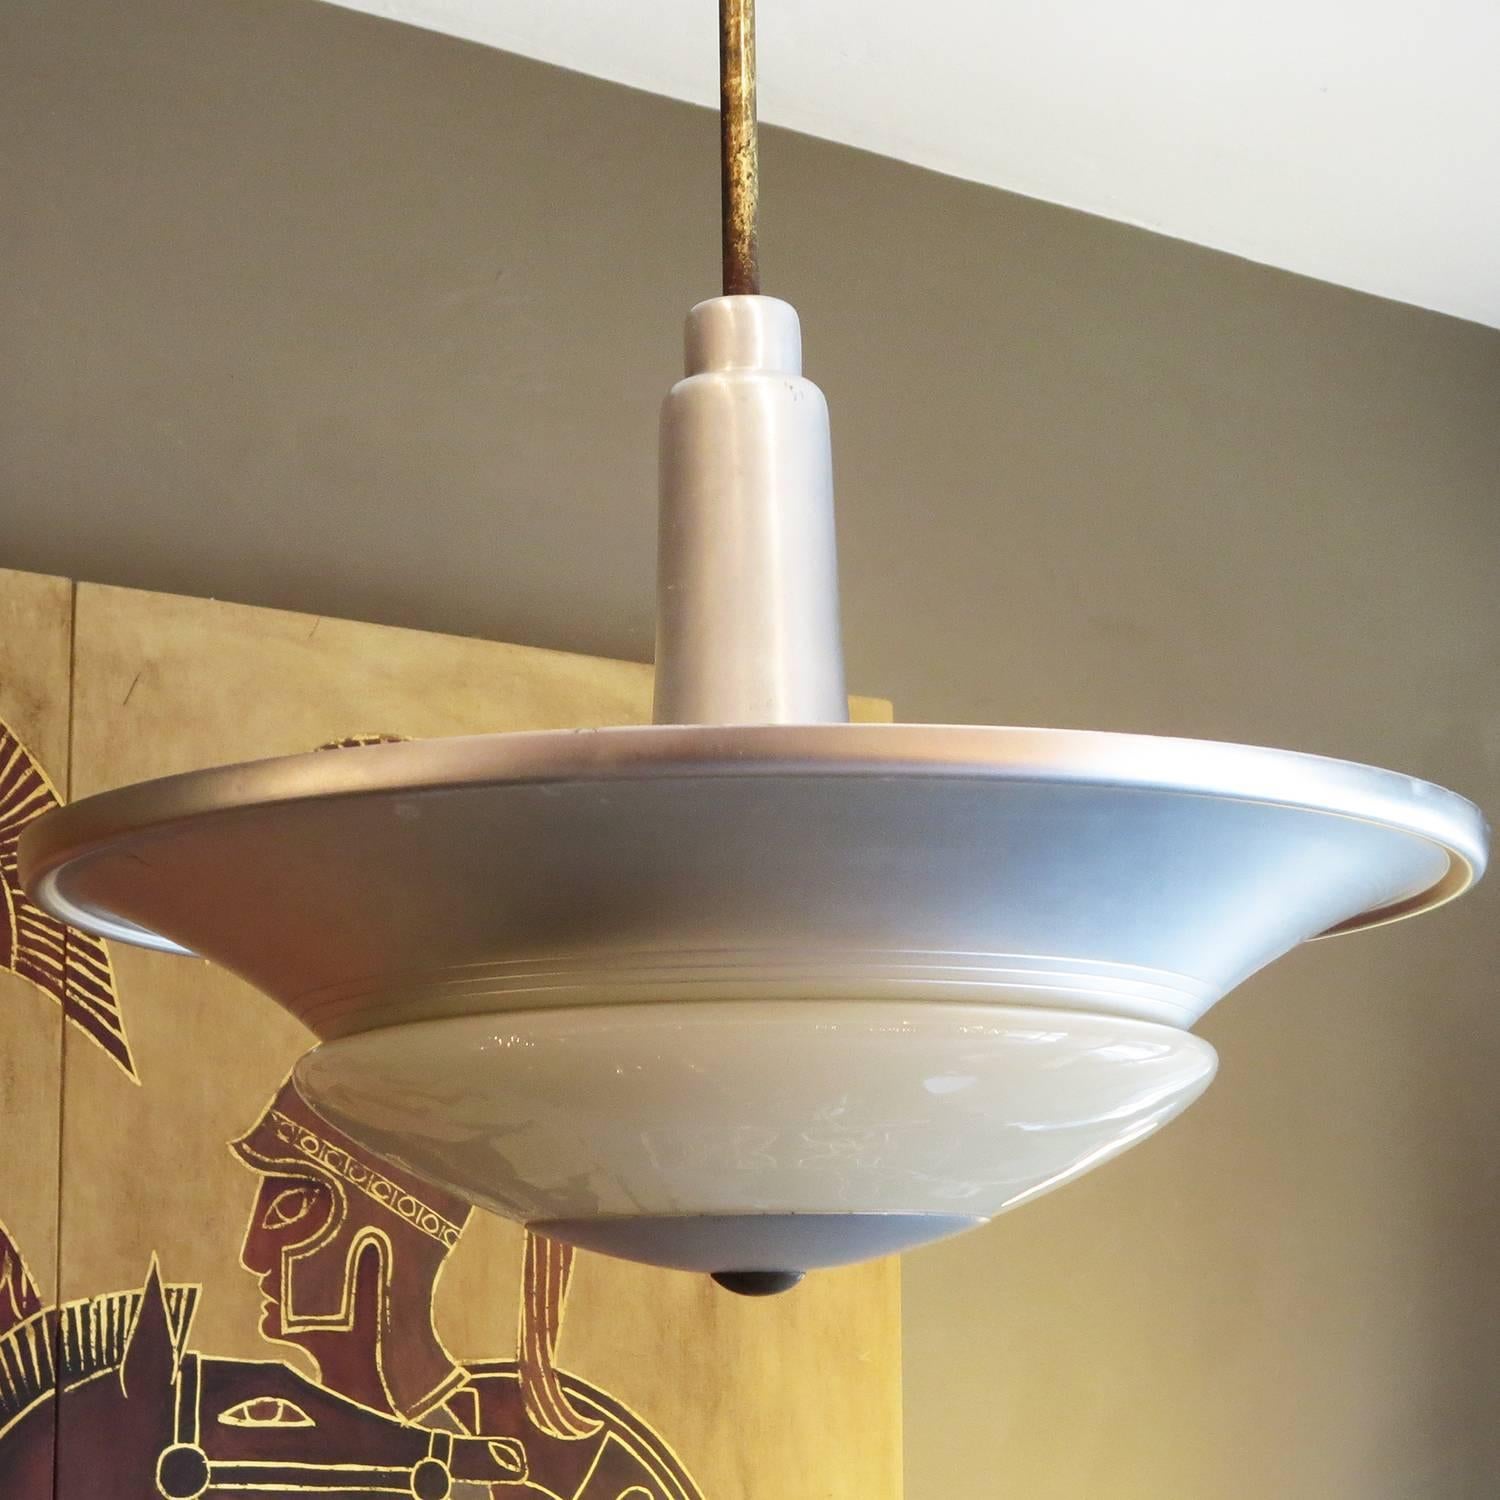 These stylish fixtures were the height of modern when introduced in the early 1930s by Westinghouse lighting. The bodies were finished in a satin aluminum, highlighted by a custard glass shade. A single 